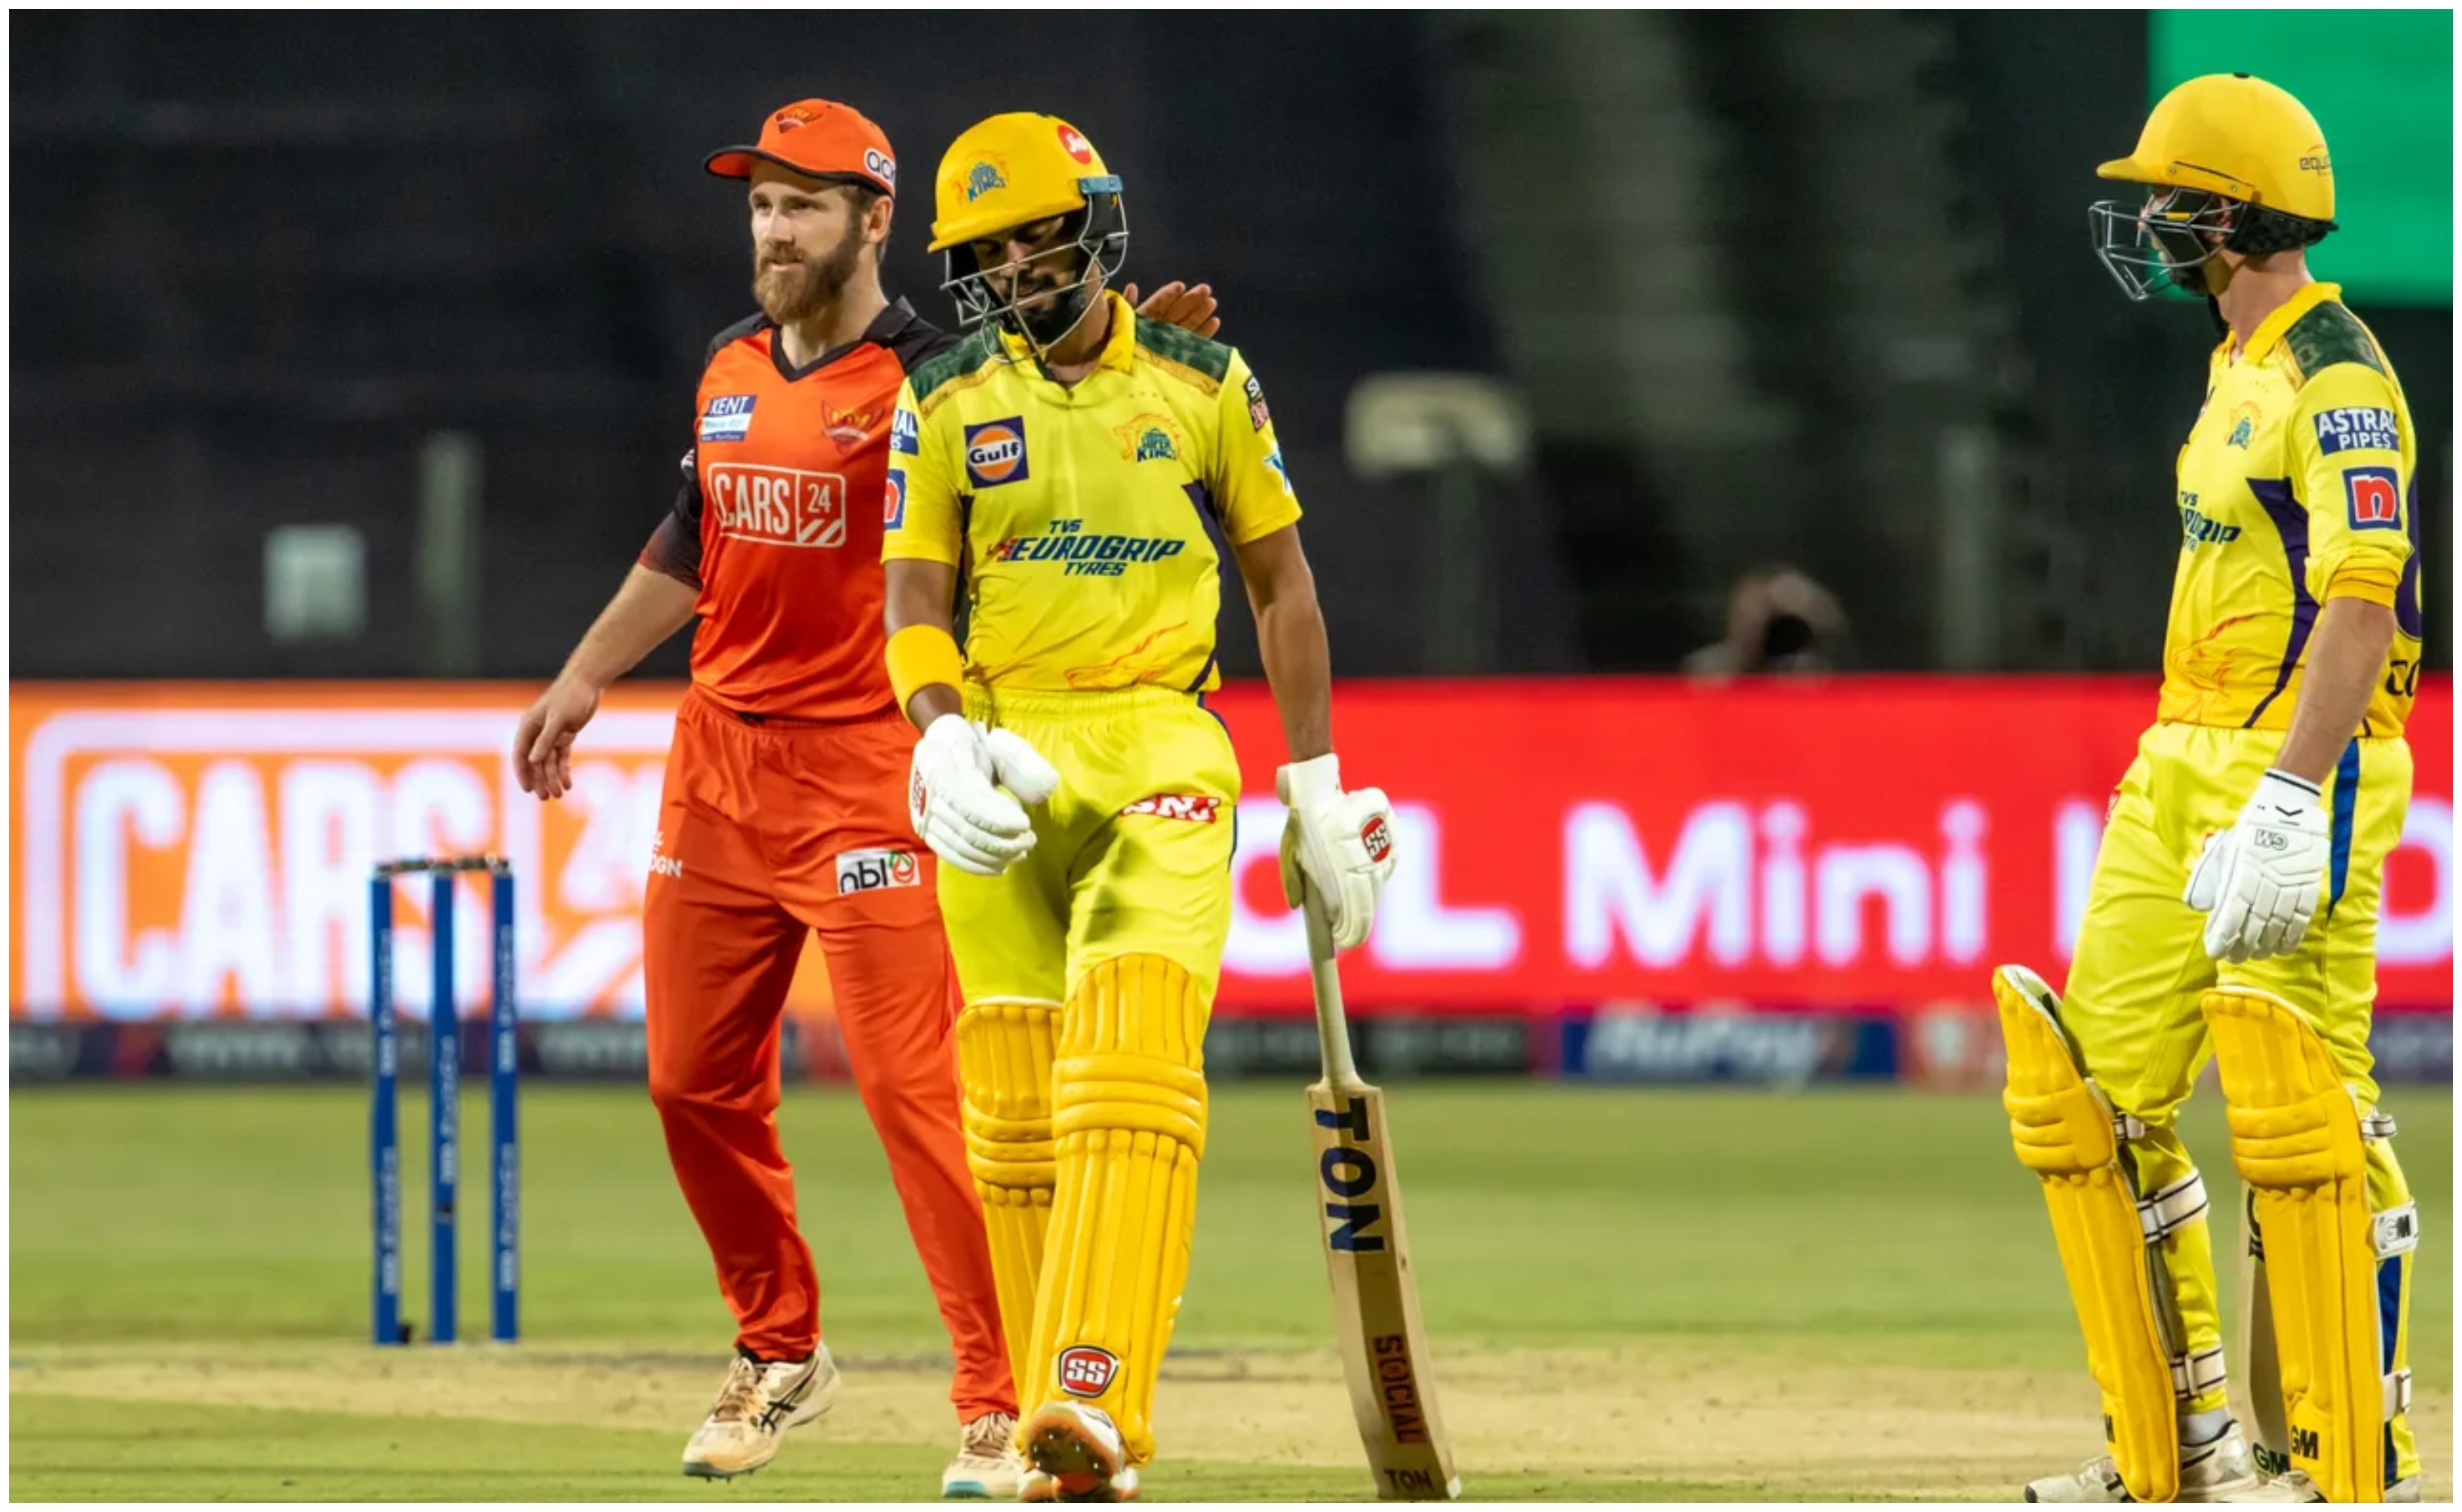 IPL 2022: Cricket fraternity reacts as Ruturaj Gaikwad's classy 99 propels  CSK to 202/2 against SRH